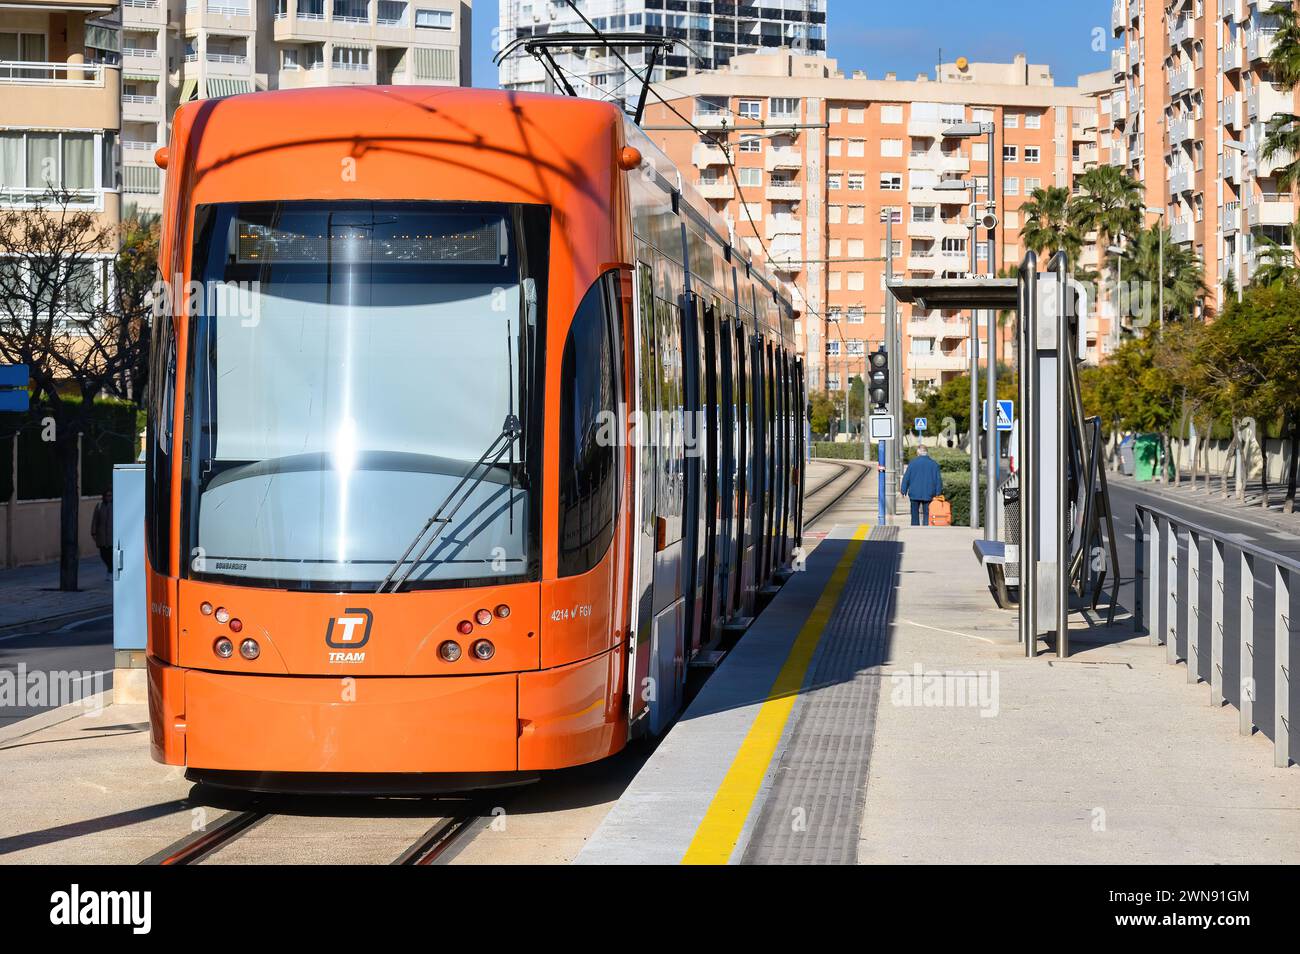 Bombardier tramway, tram, or streetcar in Alicante, Spain Stock Photo